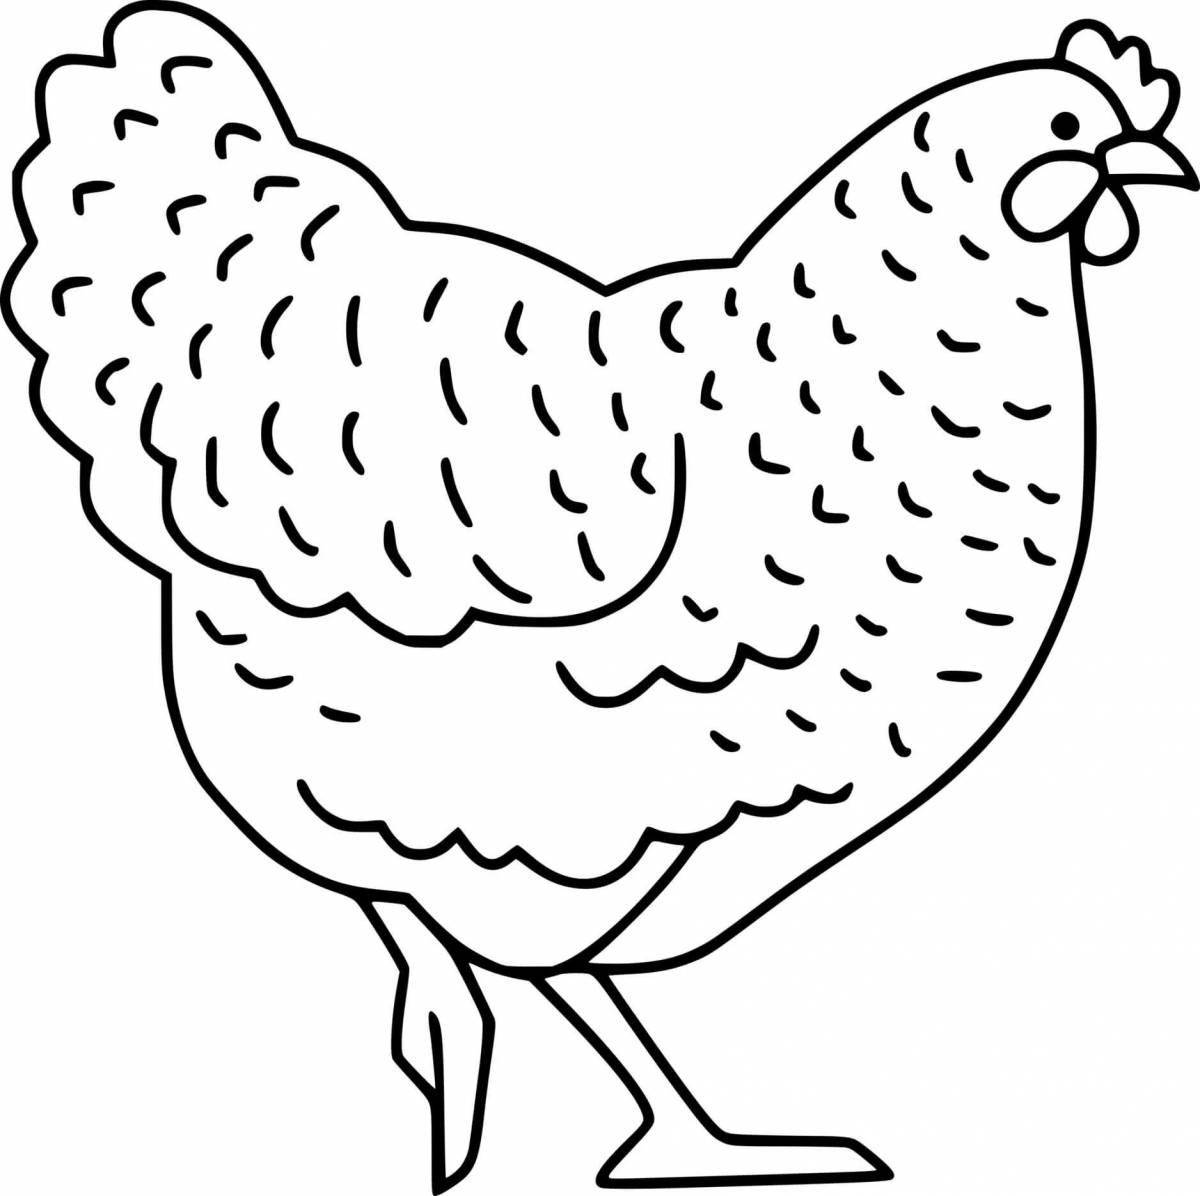 Sunny Chick coloring page for 2-3 year olds